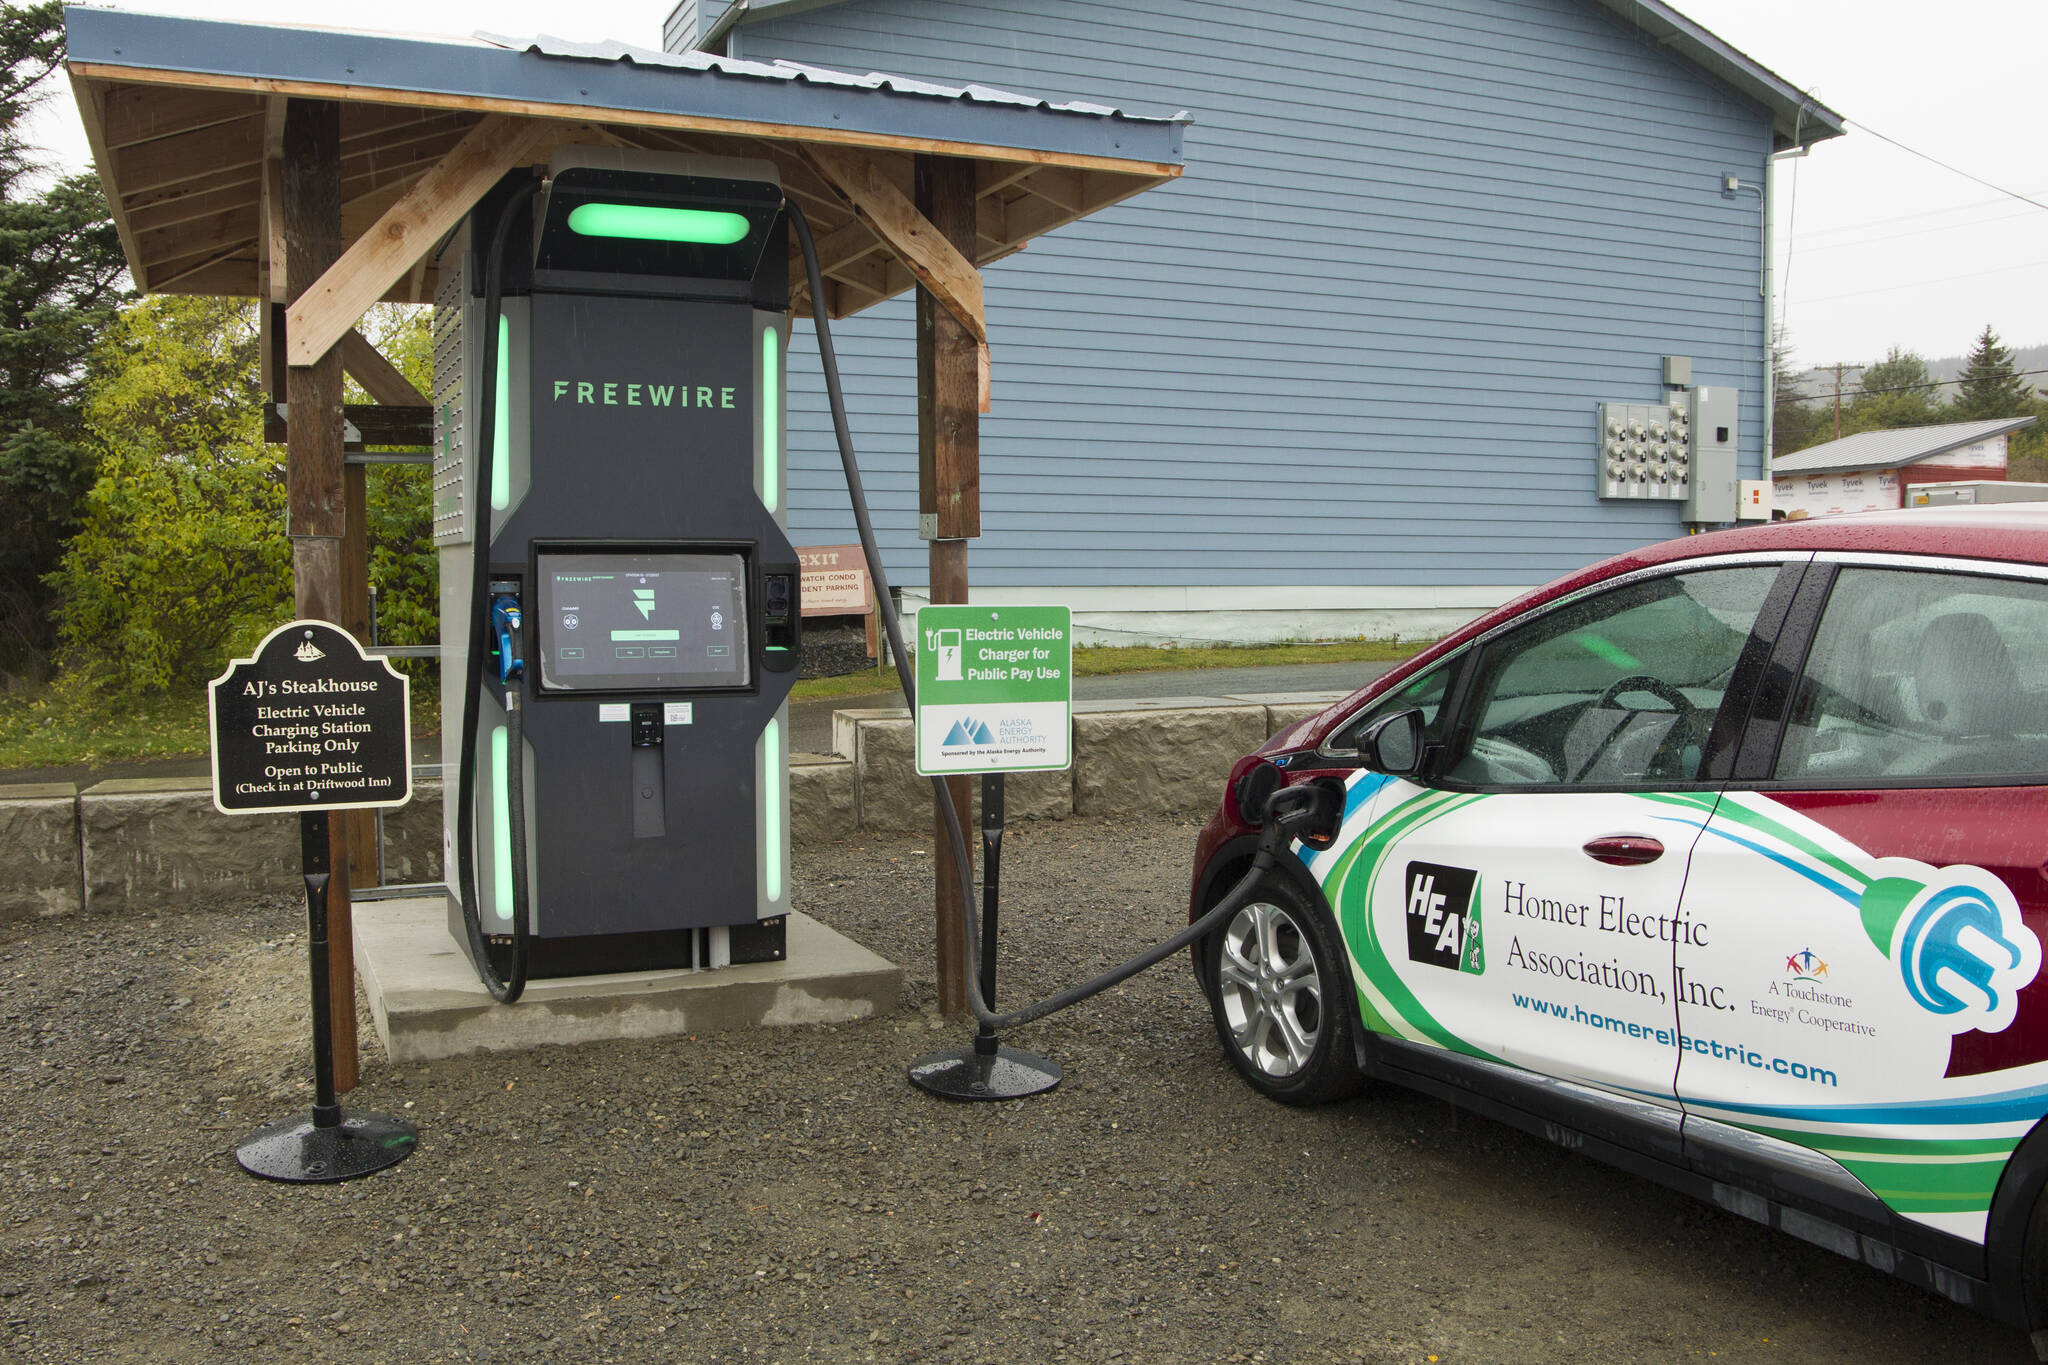 The very first FreeWire ultrafast Electric Vehicle charger in Alaska was installed at AJ's Steakhouse last week. The charging station is the first of nine EV charging stations that will connect Homer to Fairbanks. (Photo by Sarah Knapp/Homer News)